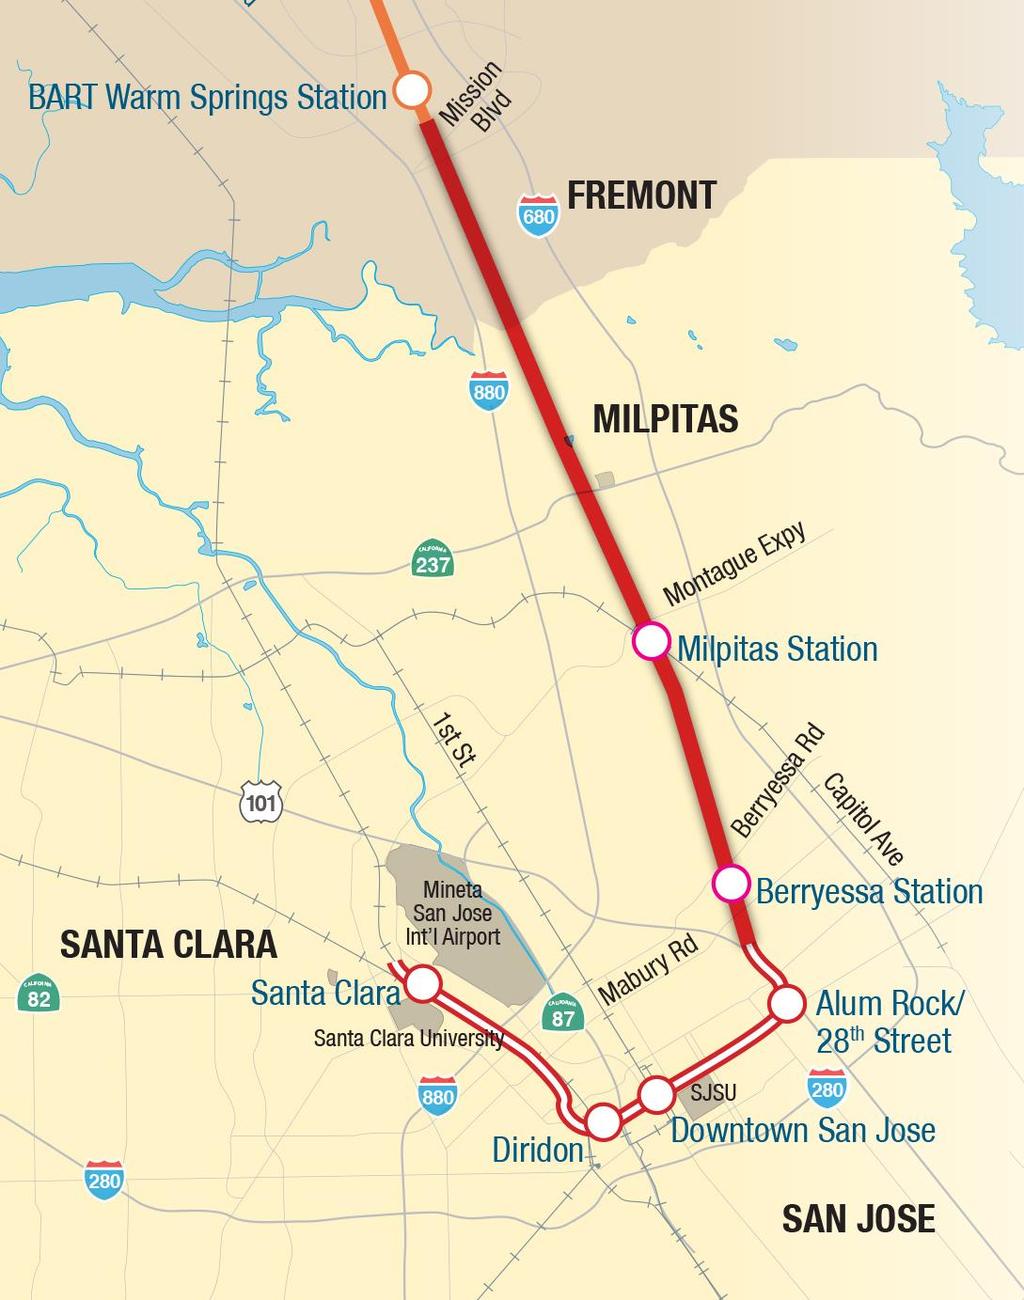 VTA s BART Silicon Valley Phase I Extension 10-mile extension under construction 2 stations: Milpitas & San Jose Berryessa Anticipated opening year ridership: 23,000 per average weekday $2.